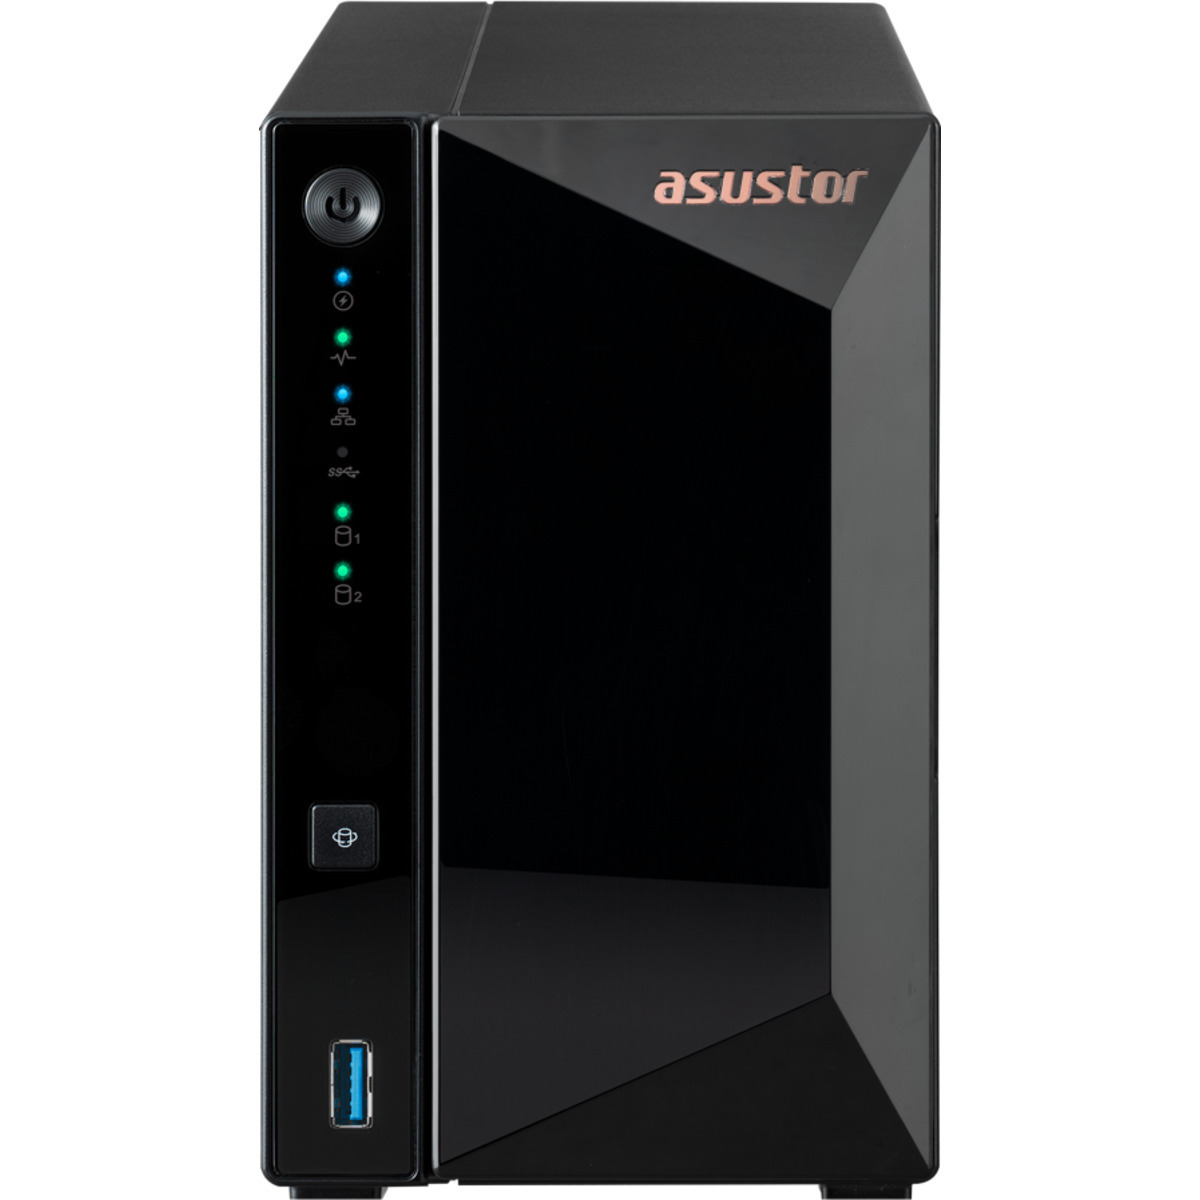 ASUSTOR DRIVESTOR 2 Pro AS3302T 8tb 2-Bay Desktop Personal / Basic Home / Small Office NAS - Network Attached Storage Device 1x8tb Seagate IronWolf Pro ST8000NT001 3.5 7200rpm SATA 6Gb/s HDD NAS Class Drives Installed - Burn-In Tested - ON SALE DRIVESTOR 2 Pro AS3302T